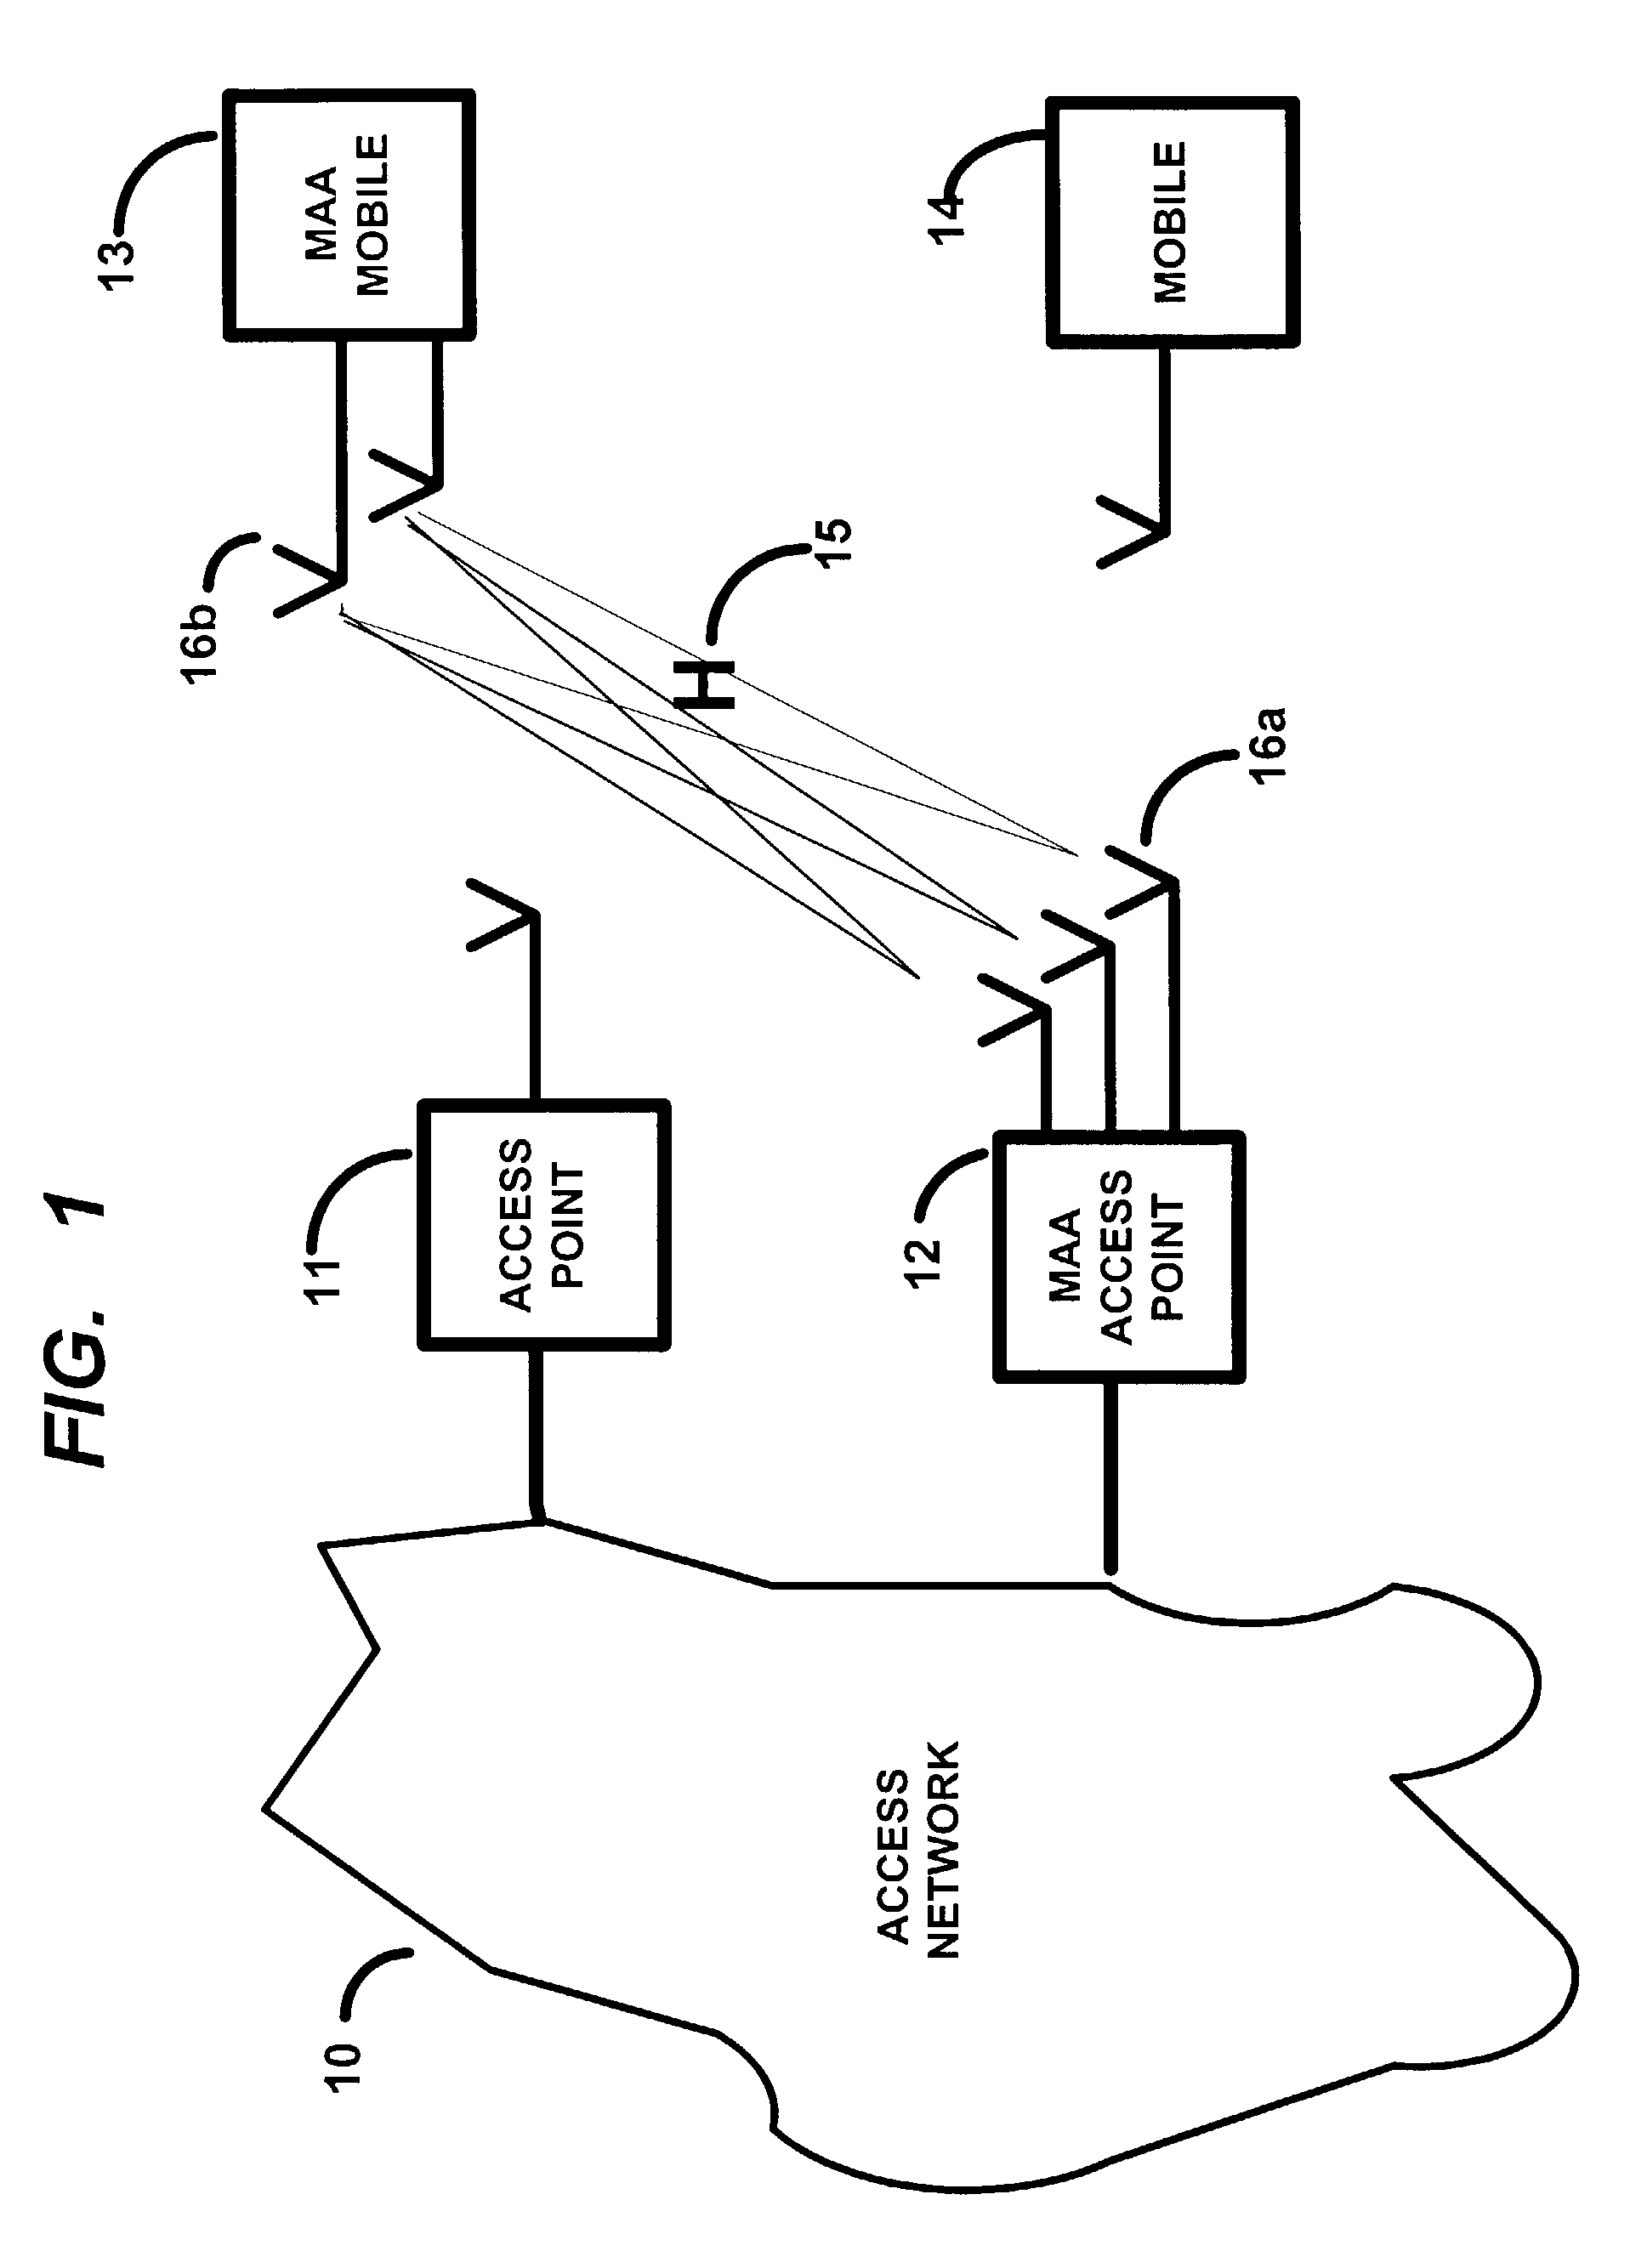 Multi input multi output wireless communication method and apparatus providing extended range and extended rate across imperfectly estimated channels